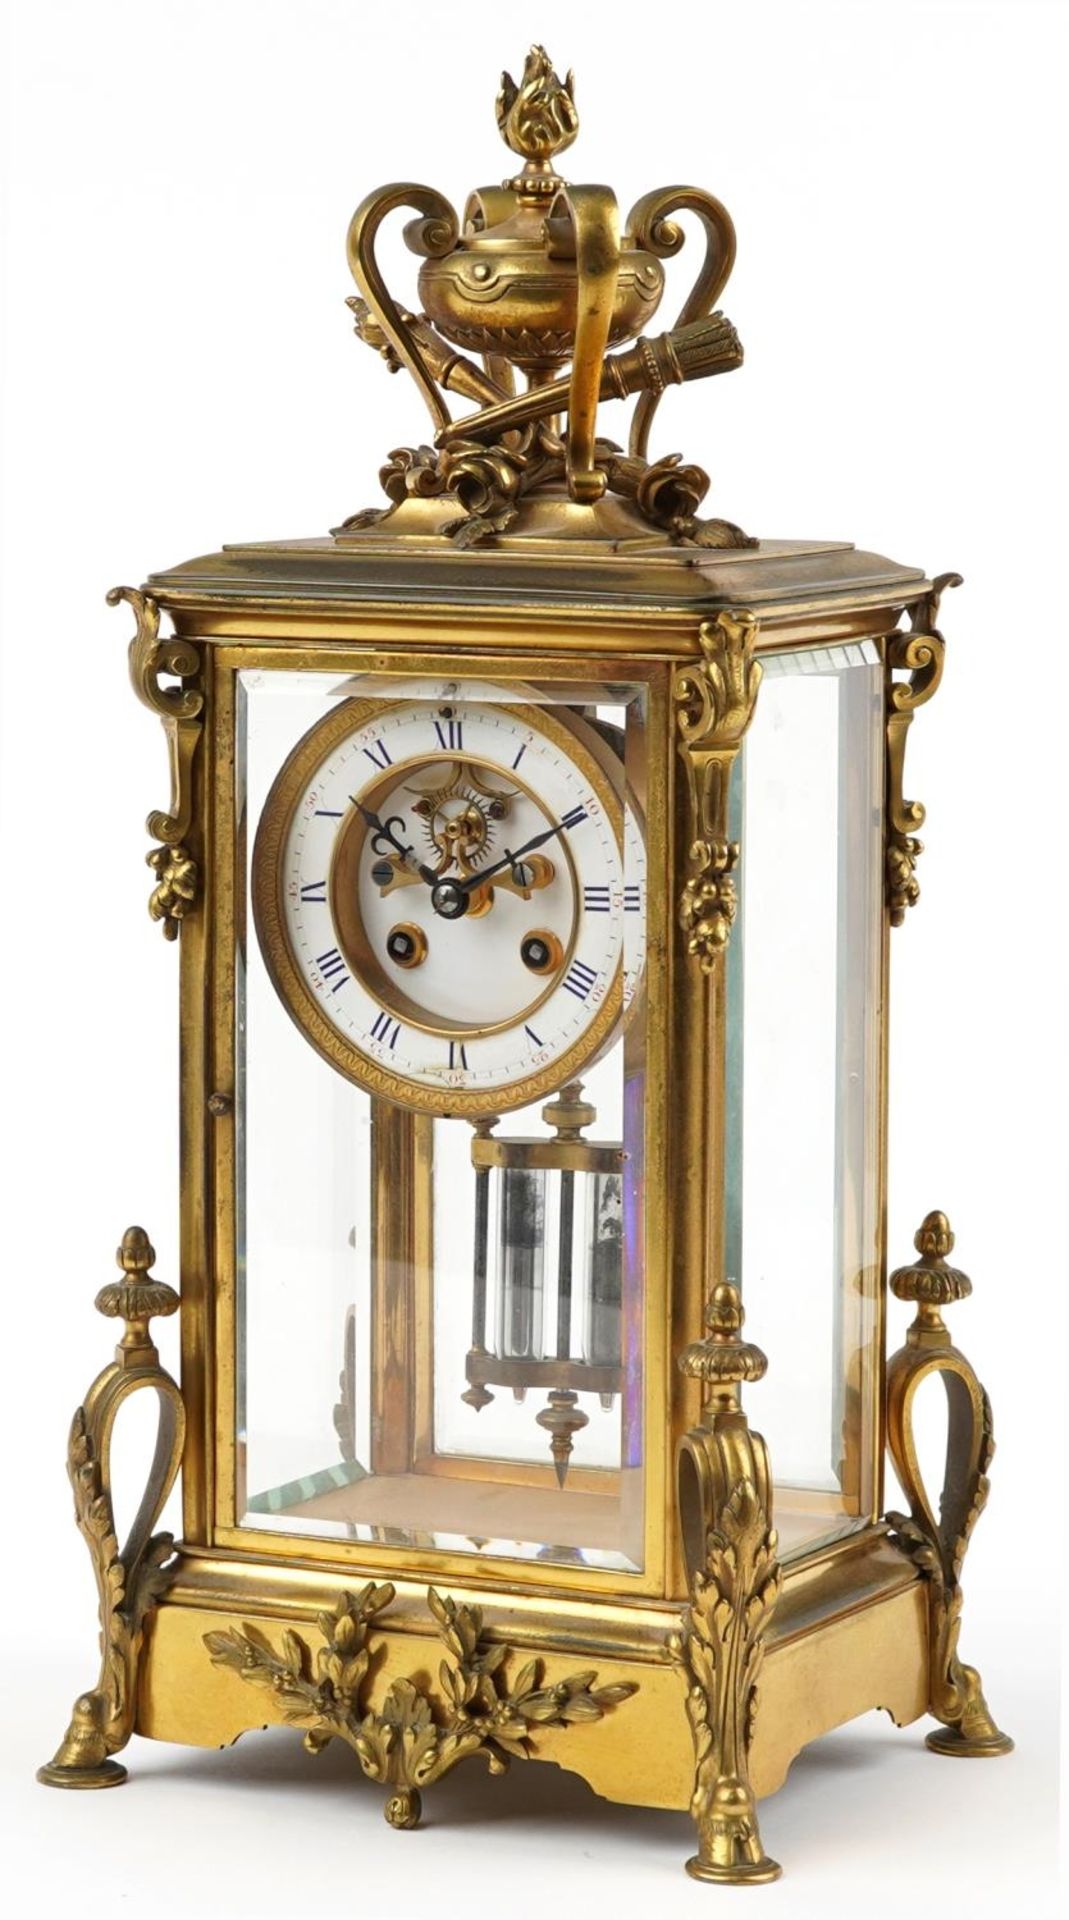 19th century French ormolu four glass mantle clock striking on a bell with visible Brocot escapement